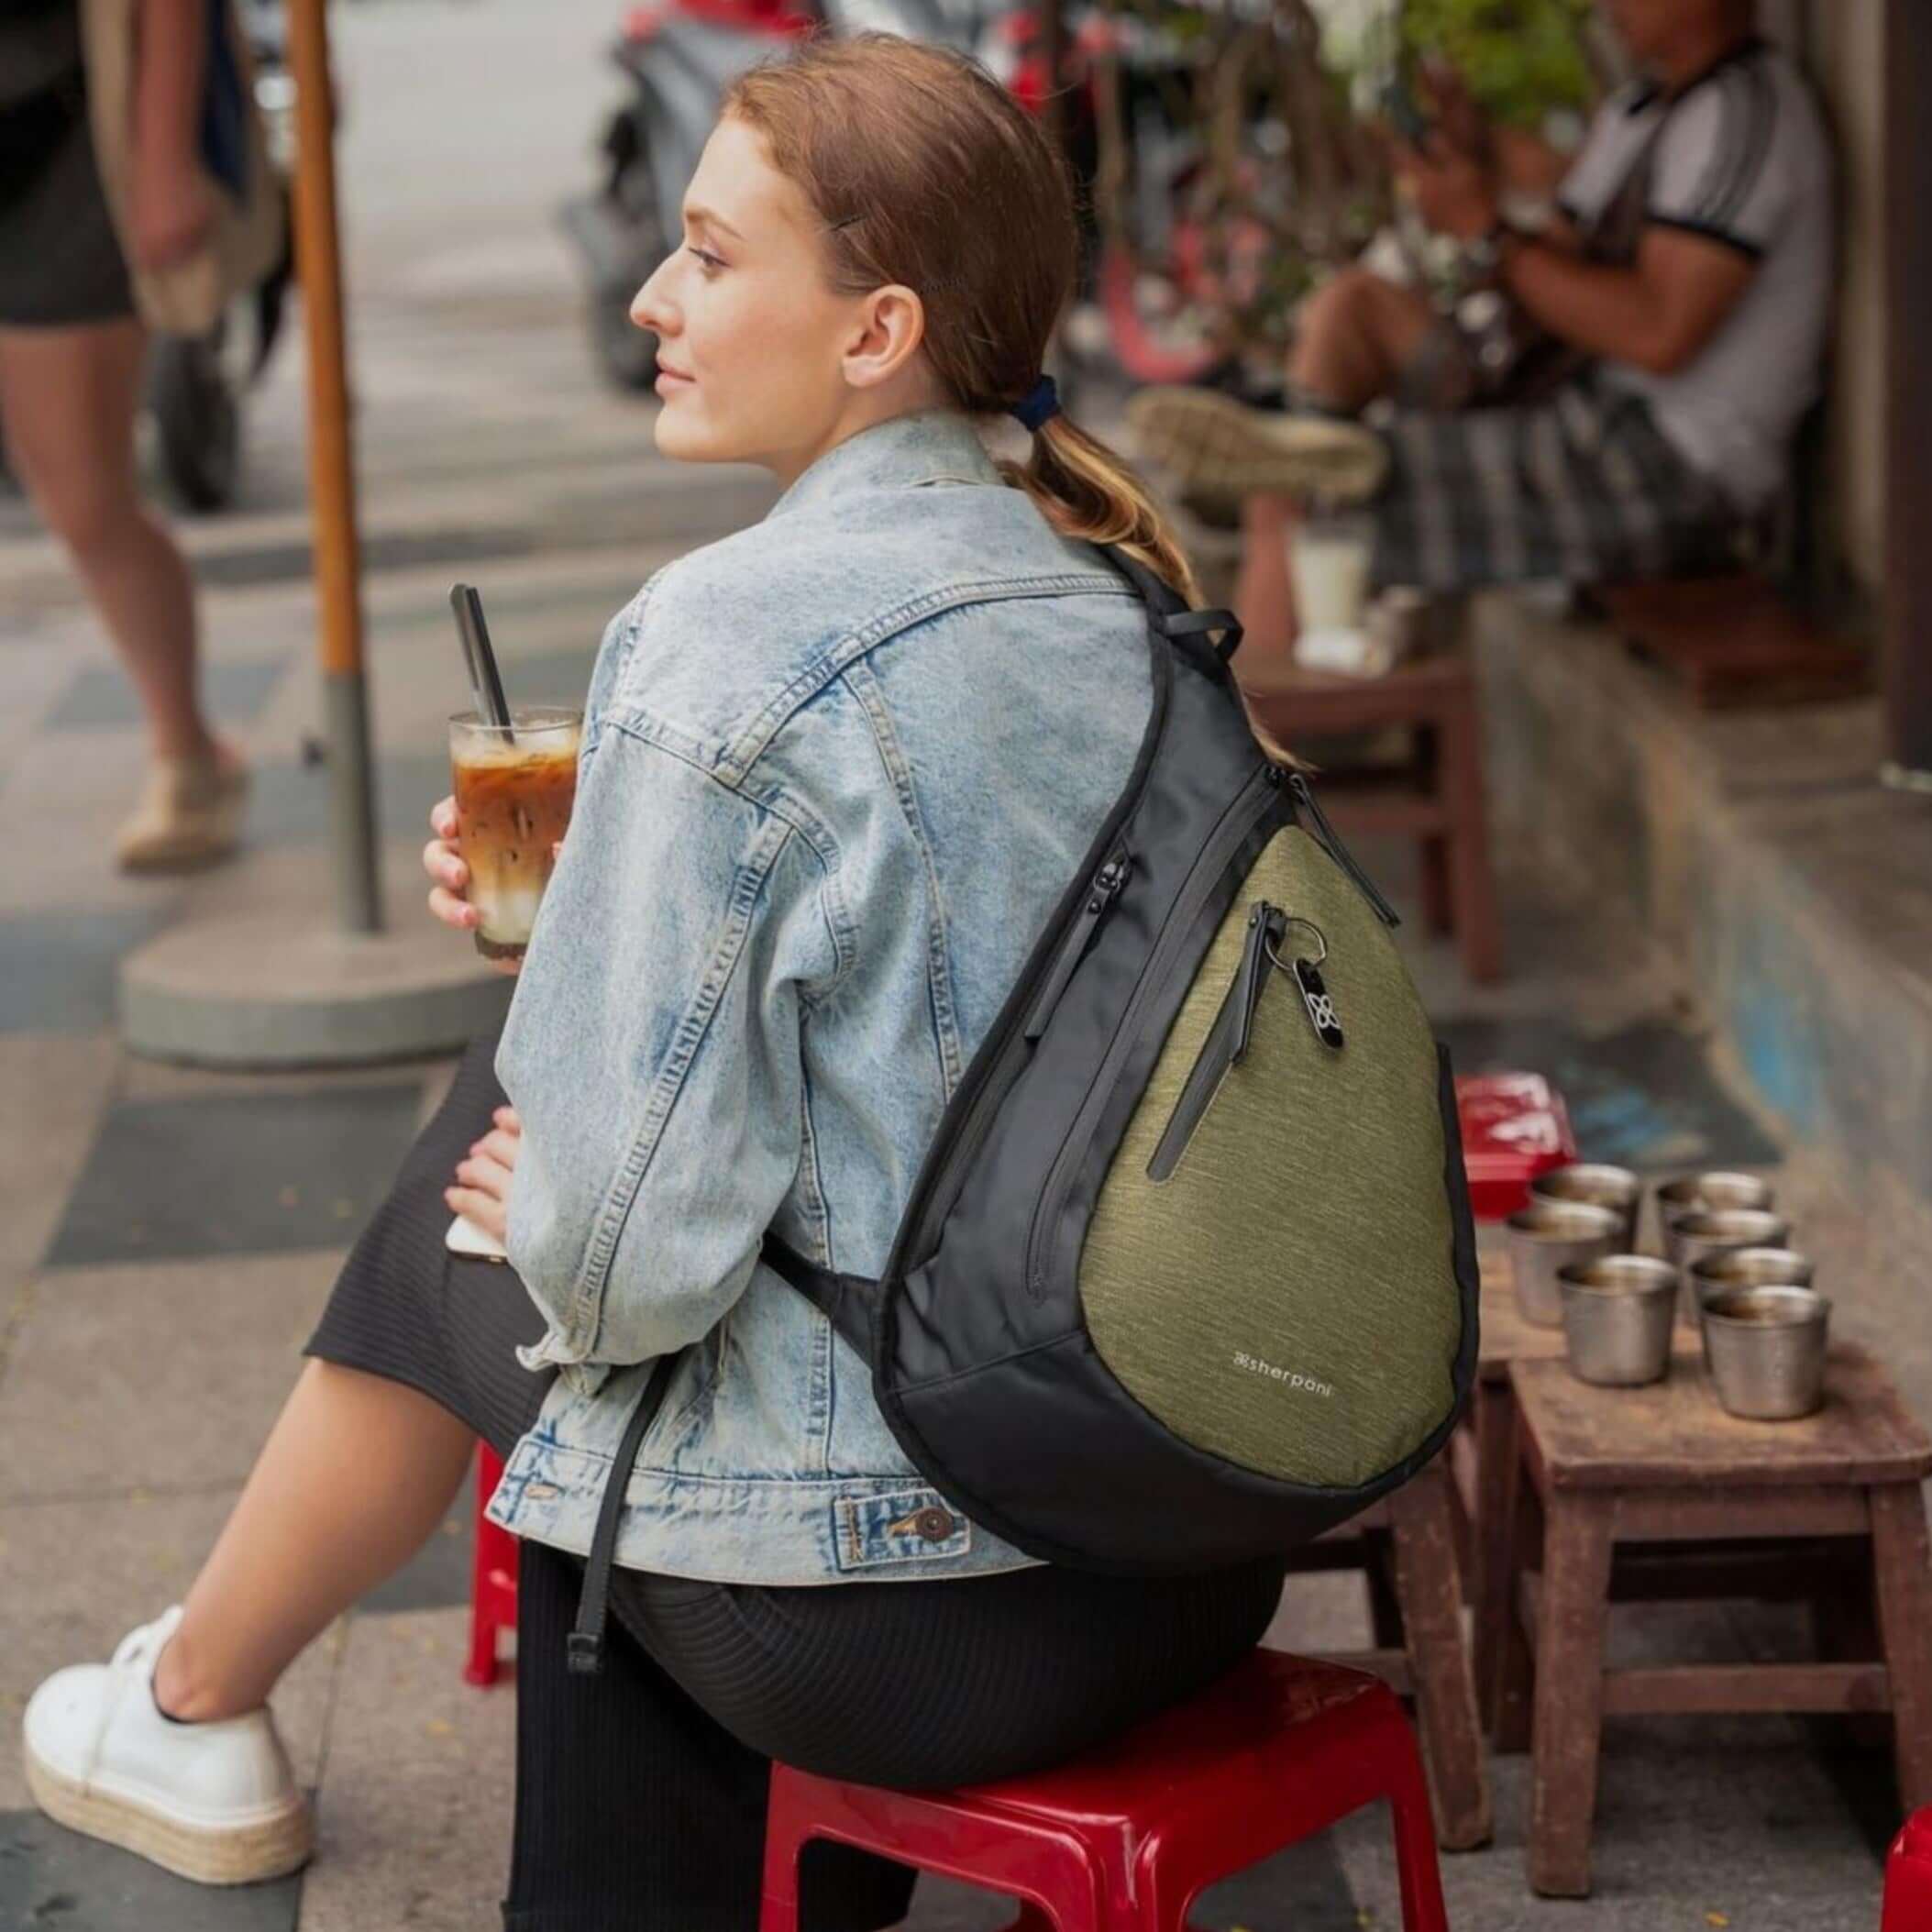 Full body view of a brown haired model sitting at a cafe table outside with an iced coffee. She is facing away from the camera and looking over her left shoulder. She wears a jean jacket, a black skirt, and Sherpani’s Anti-Theft bag, the Esprit AT in Loden, across her back.